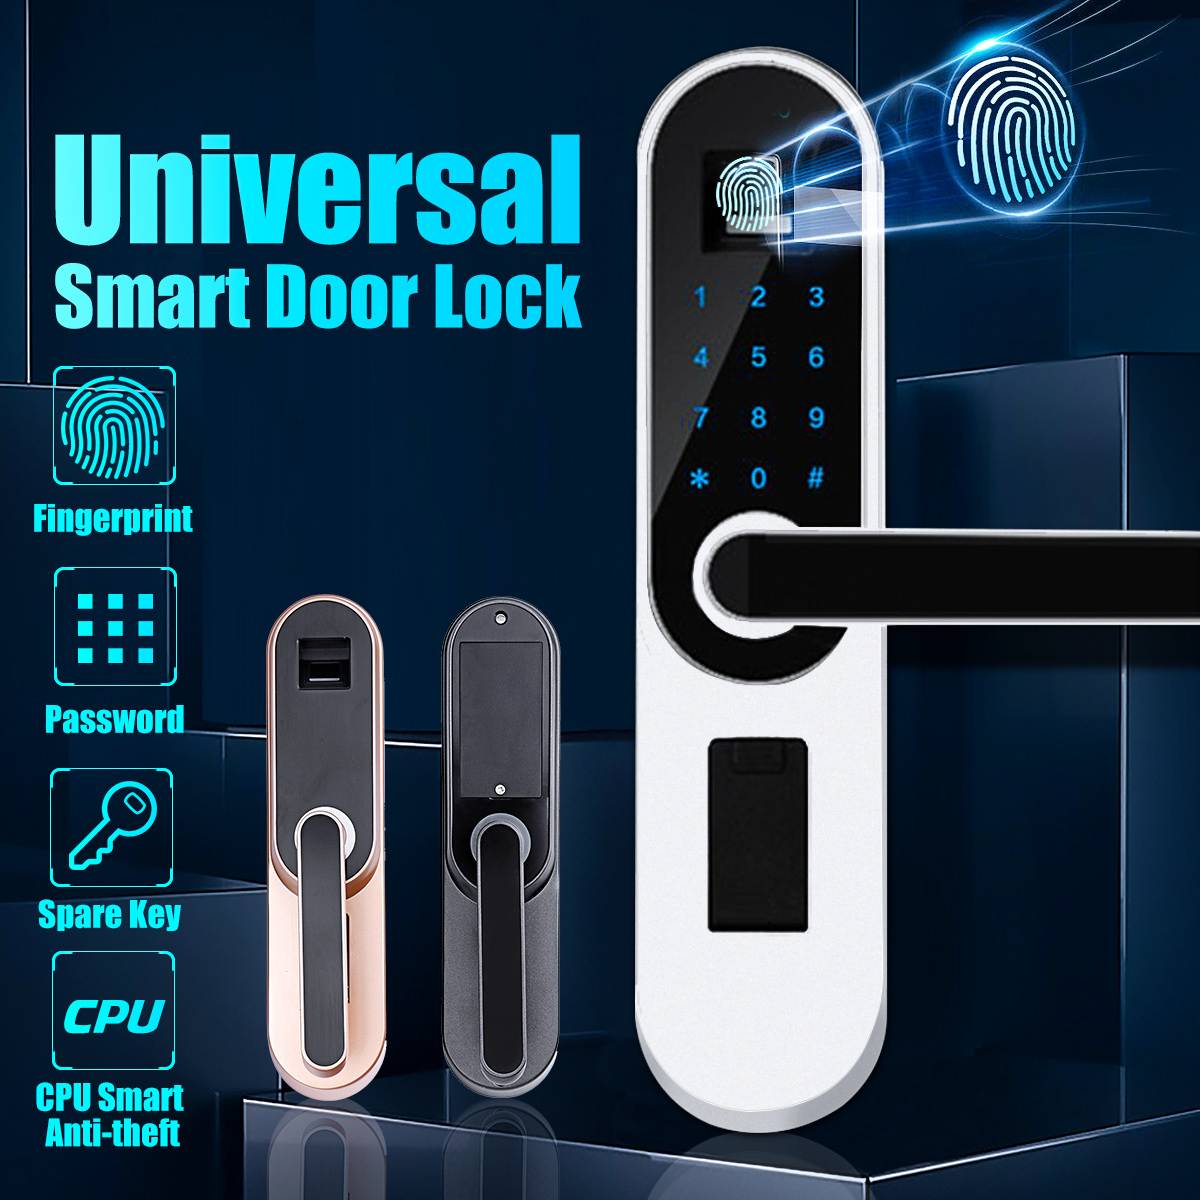 Safurance 3 Way Smart Universal Door Lock Digital Password Touch Anti-theft Security - Home Decor Gifts and More